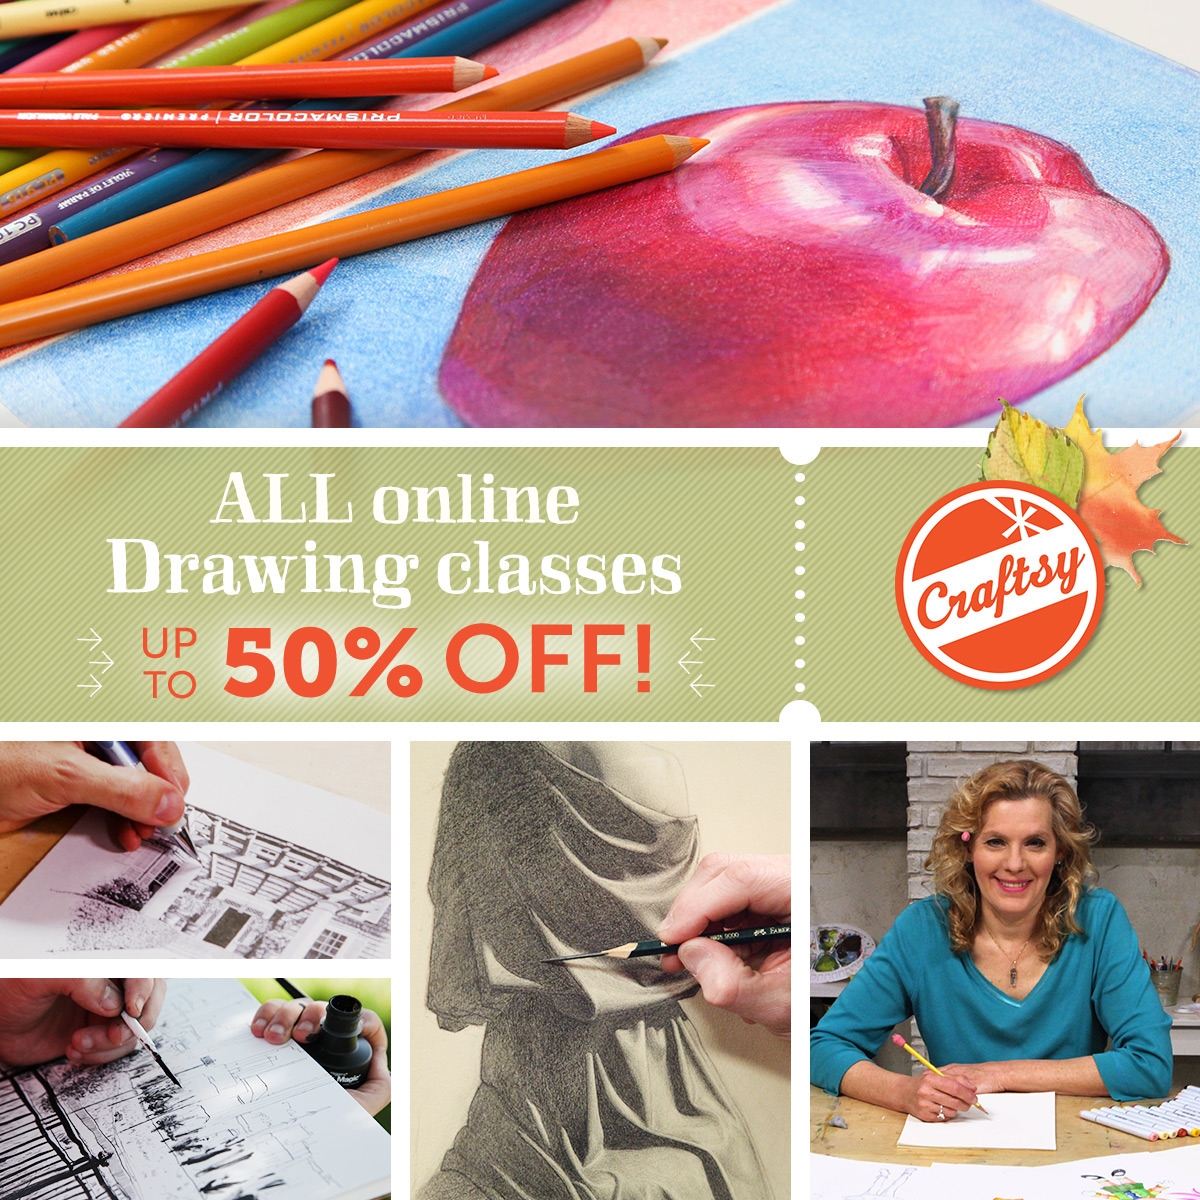 Craftsy, our longtime sponsor, is having a Big Fall Sale with all of their drawing classes (and other classes) up to 50% off. Give it a look here&gt;